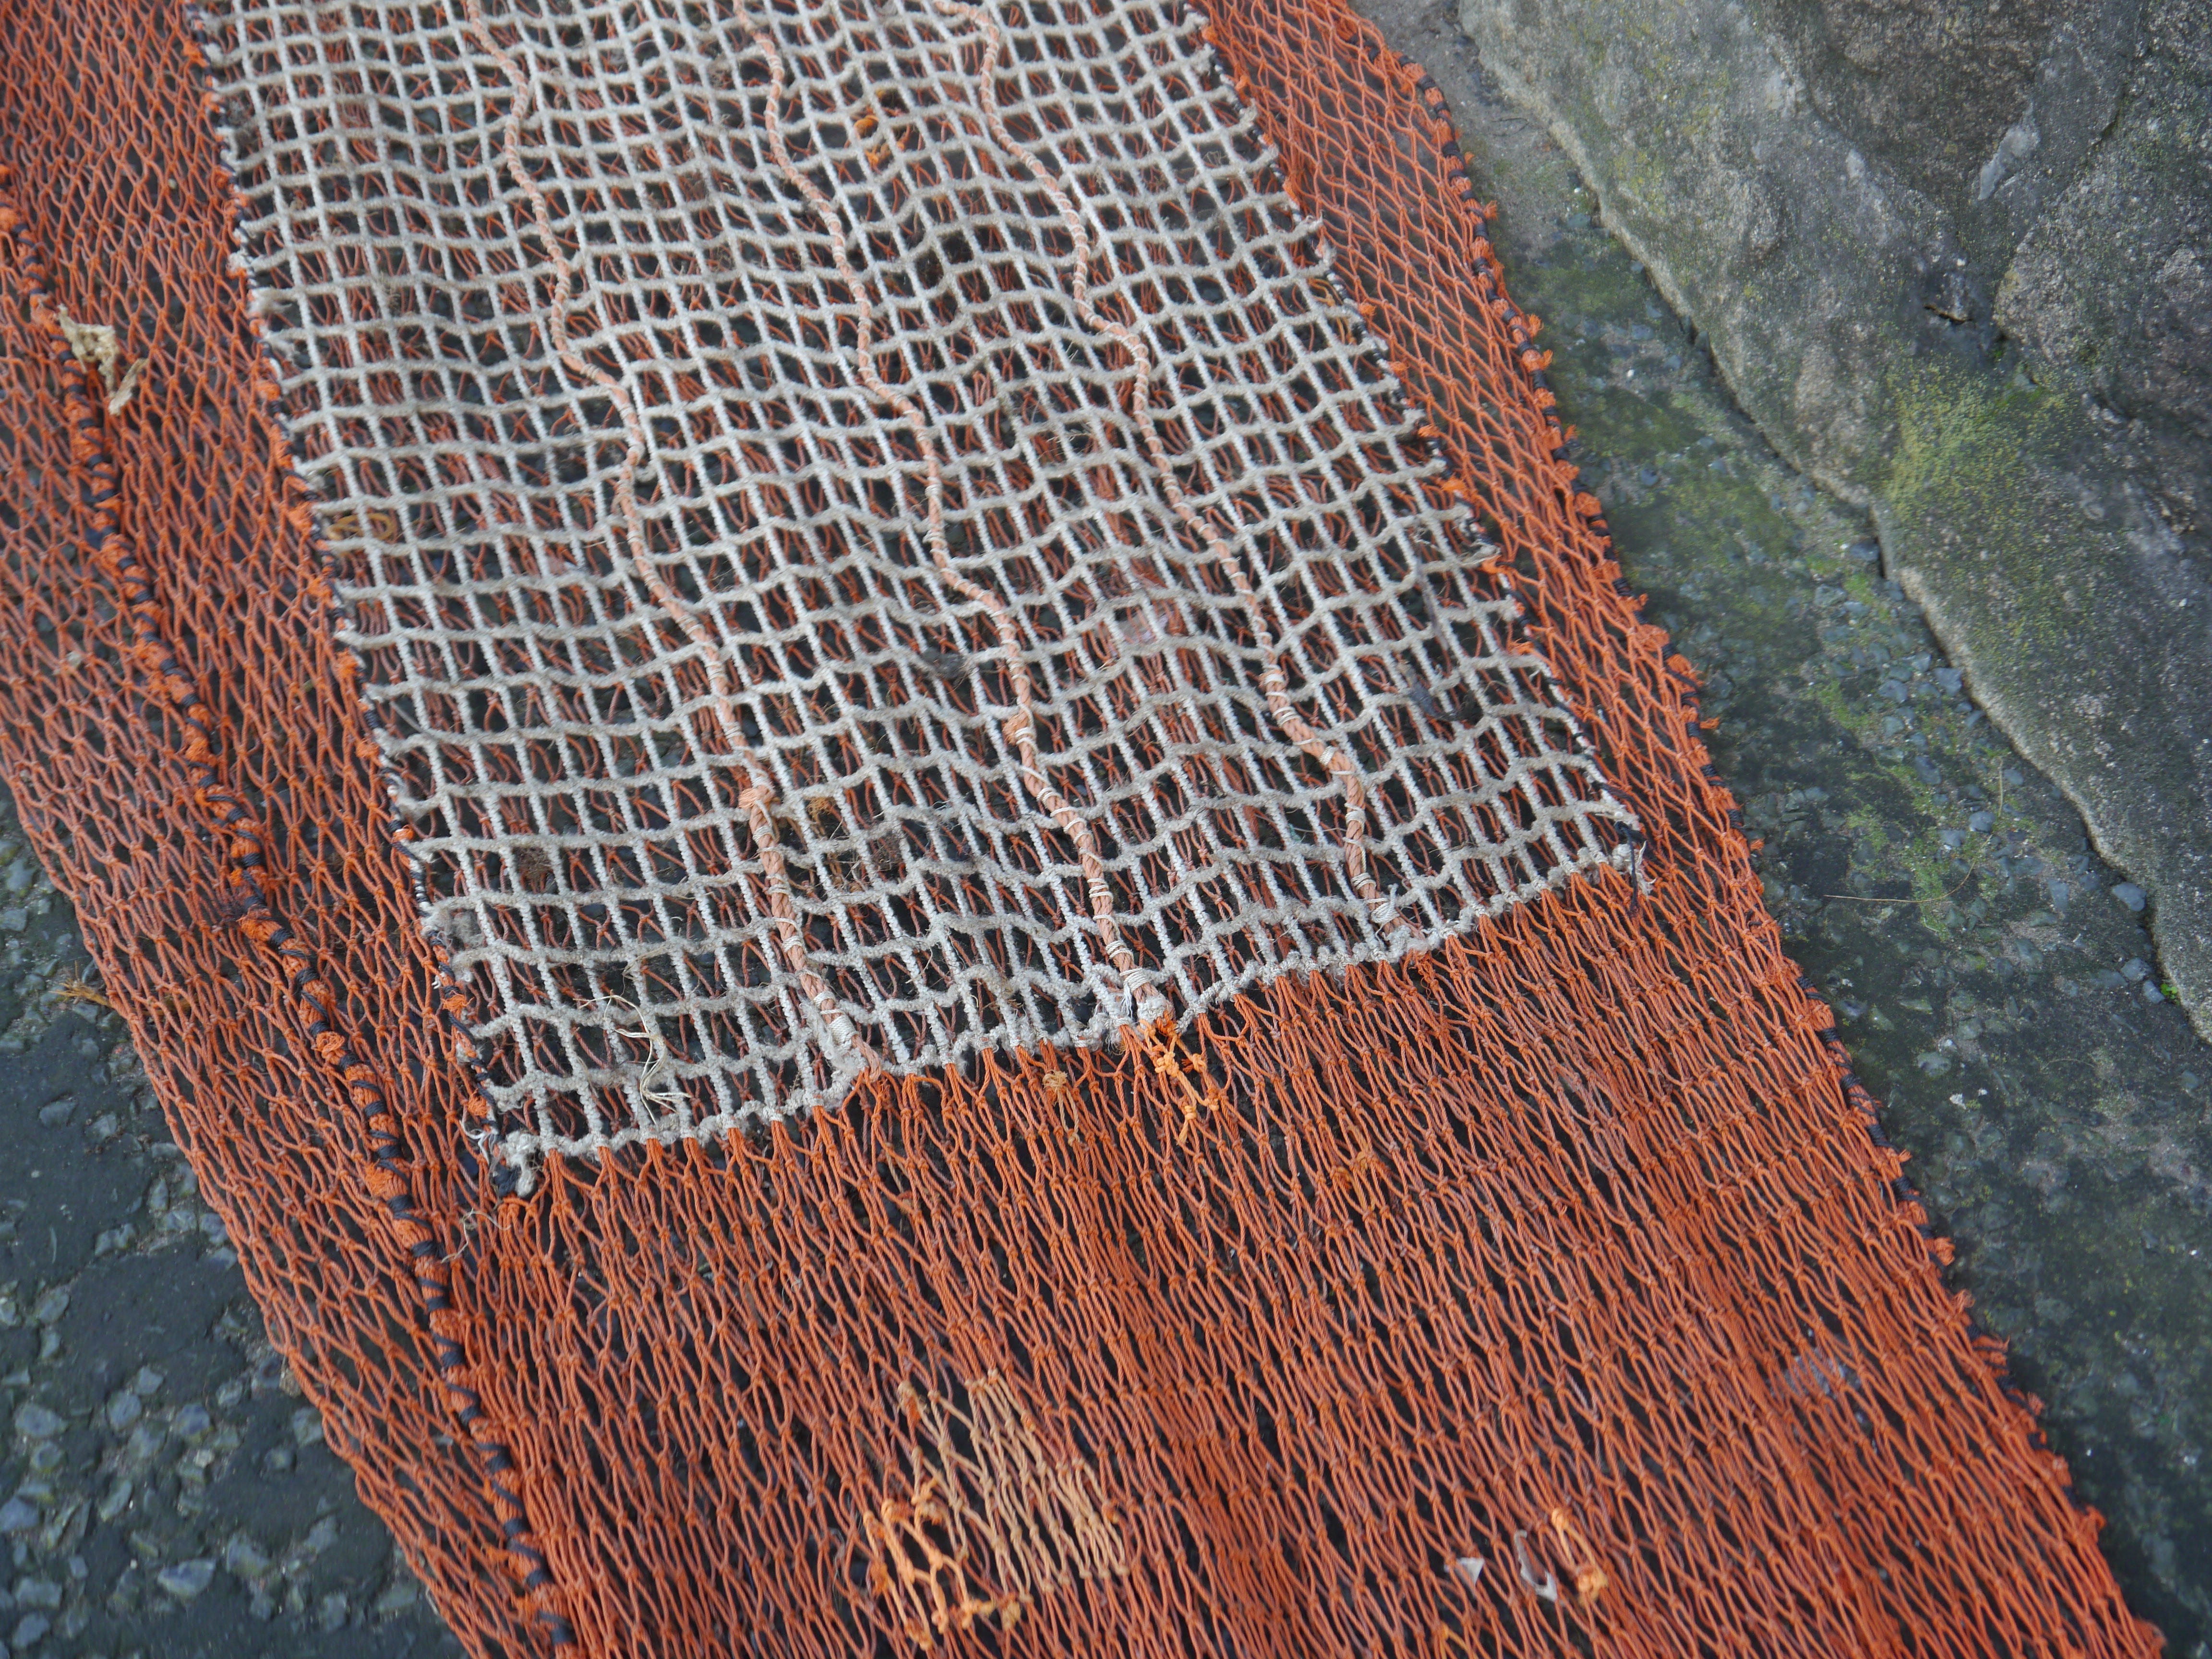 A section of diamond netting removed and replaced with a square mesh panel